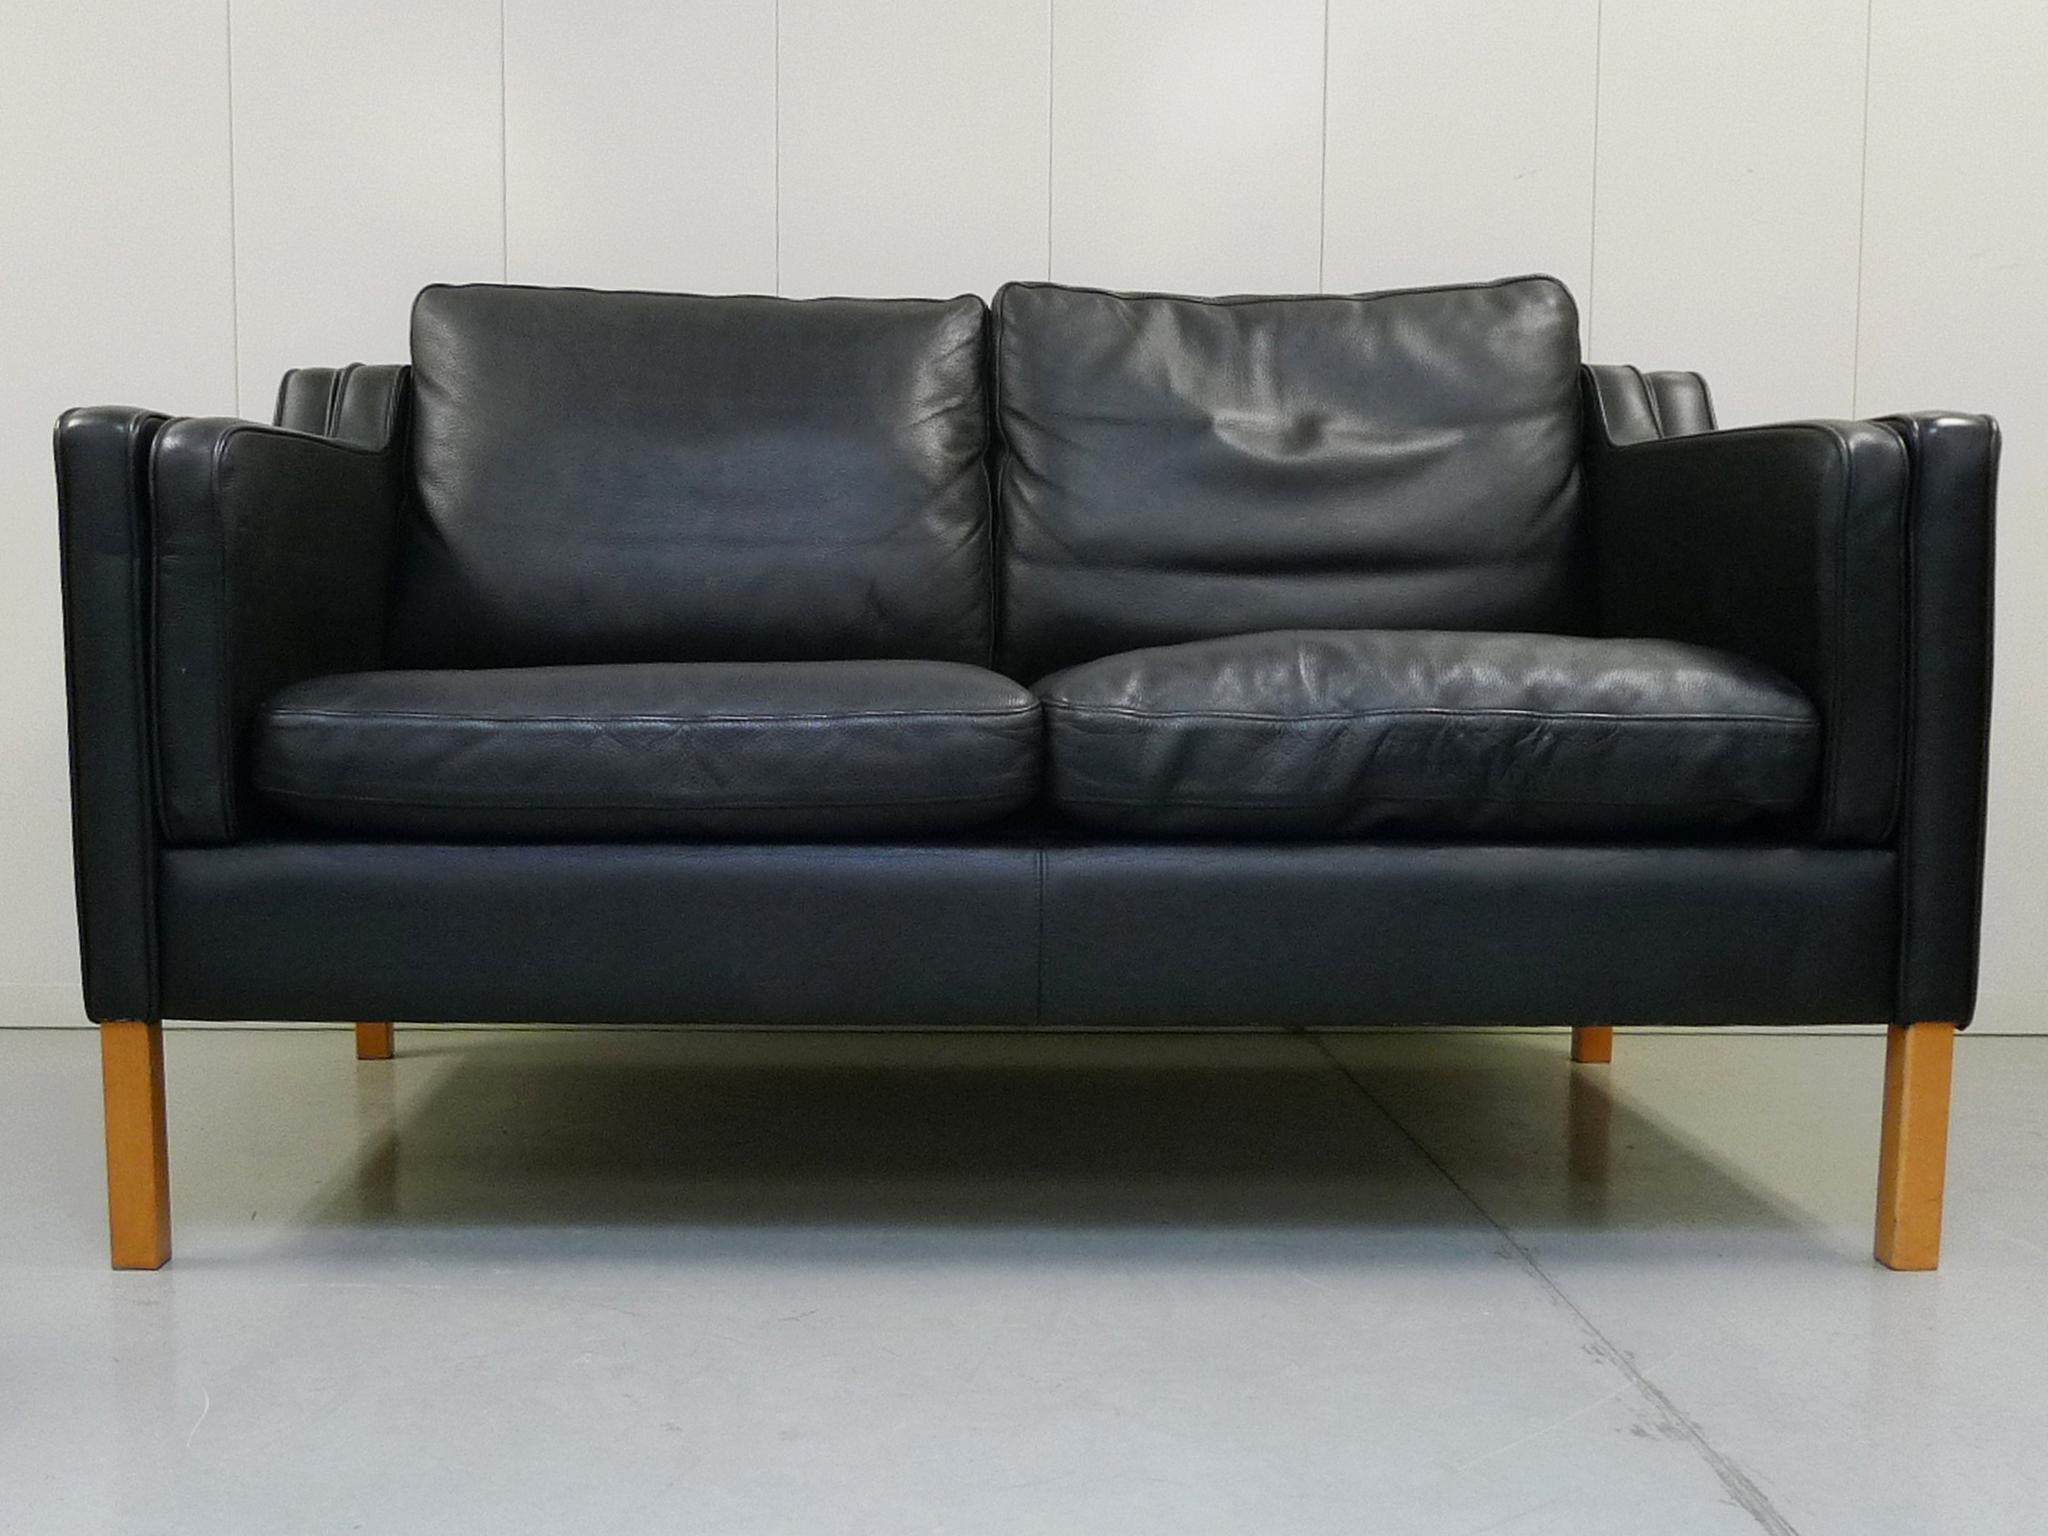 This Minimalist leather settee was designed in the manner of Børge Mogensen and manufactured by Stouby. Its design is one of clean lines and soft, rounded edges. The upholstery is a well-aged black leather, while the frame is beechwood. The settee